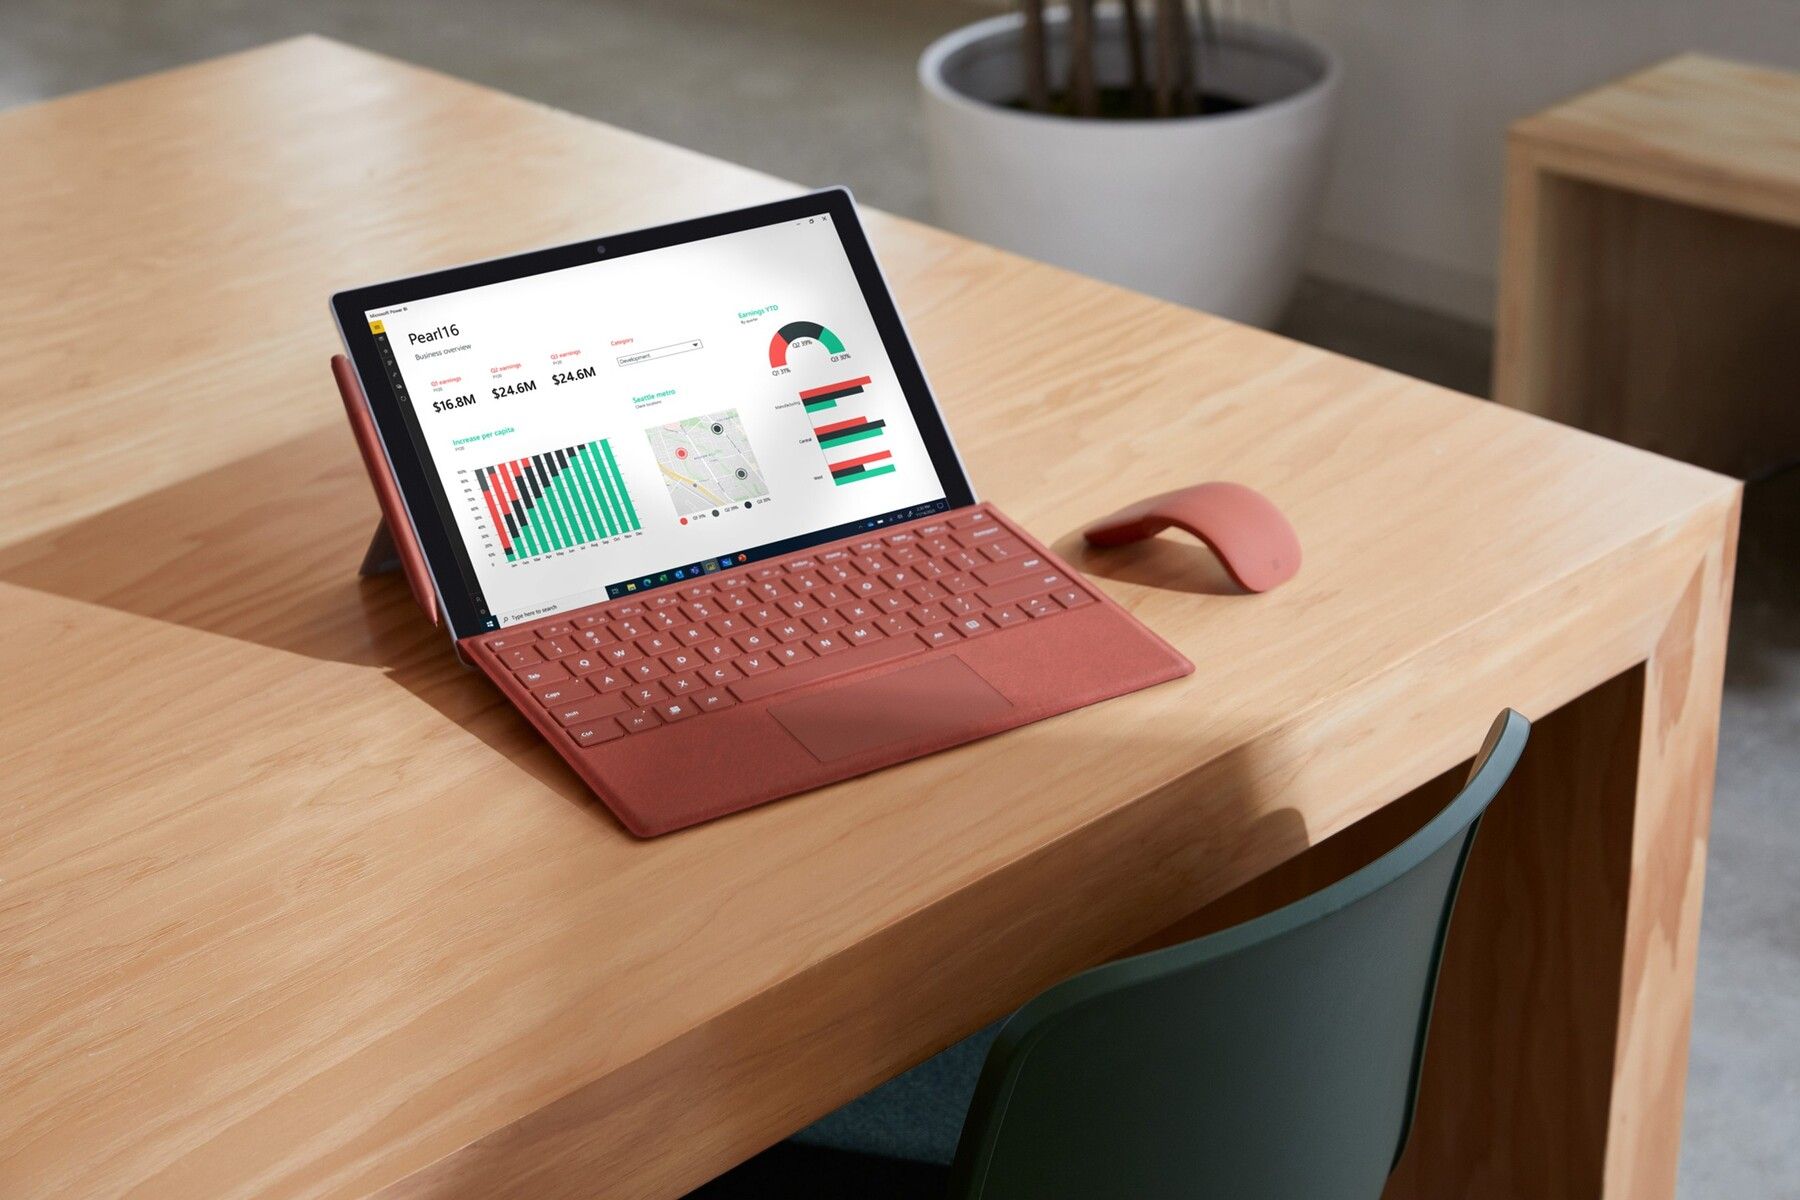 Microsoft Surface Pro 7 Laptop Announced With 11th Gen Intel Tiger Lake Cpus Removable Ssd And More 91mobiles Com